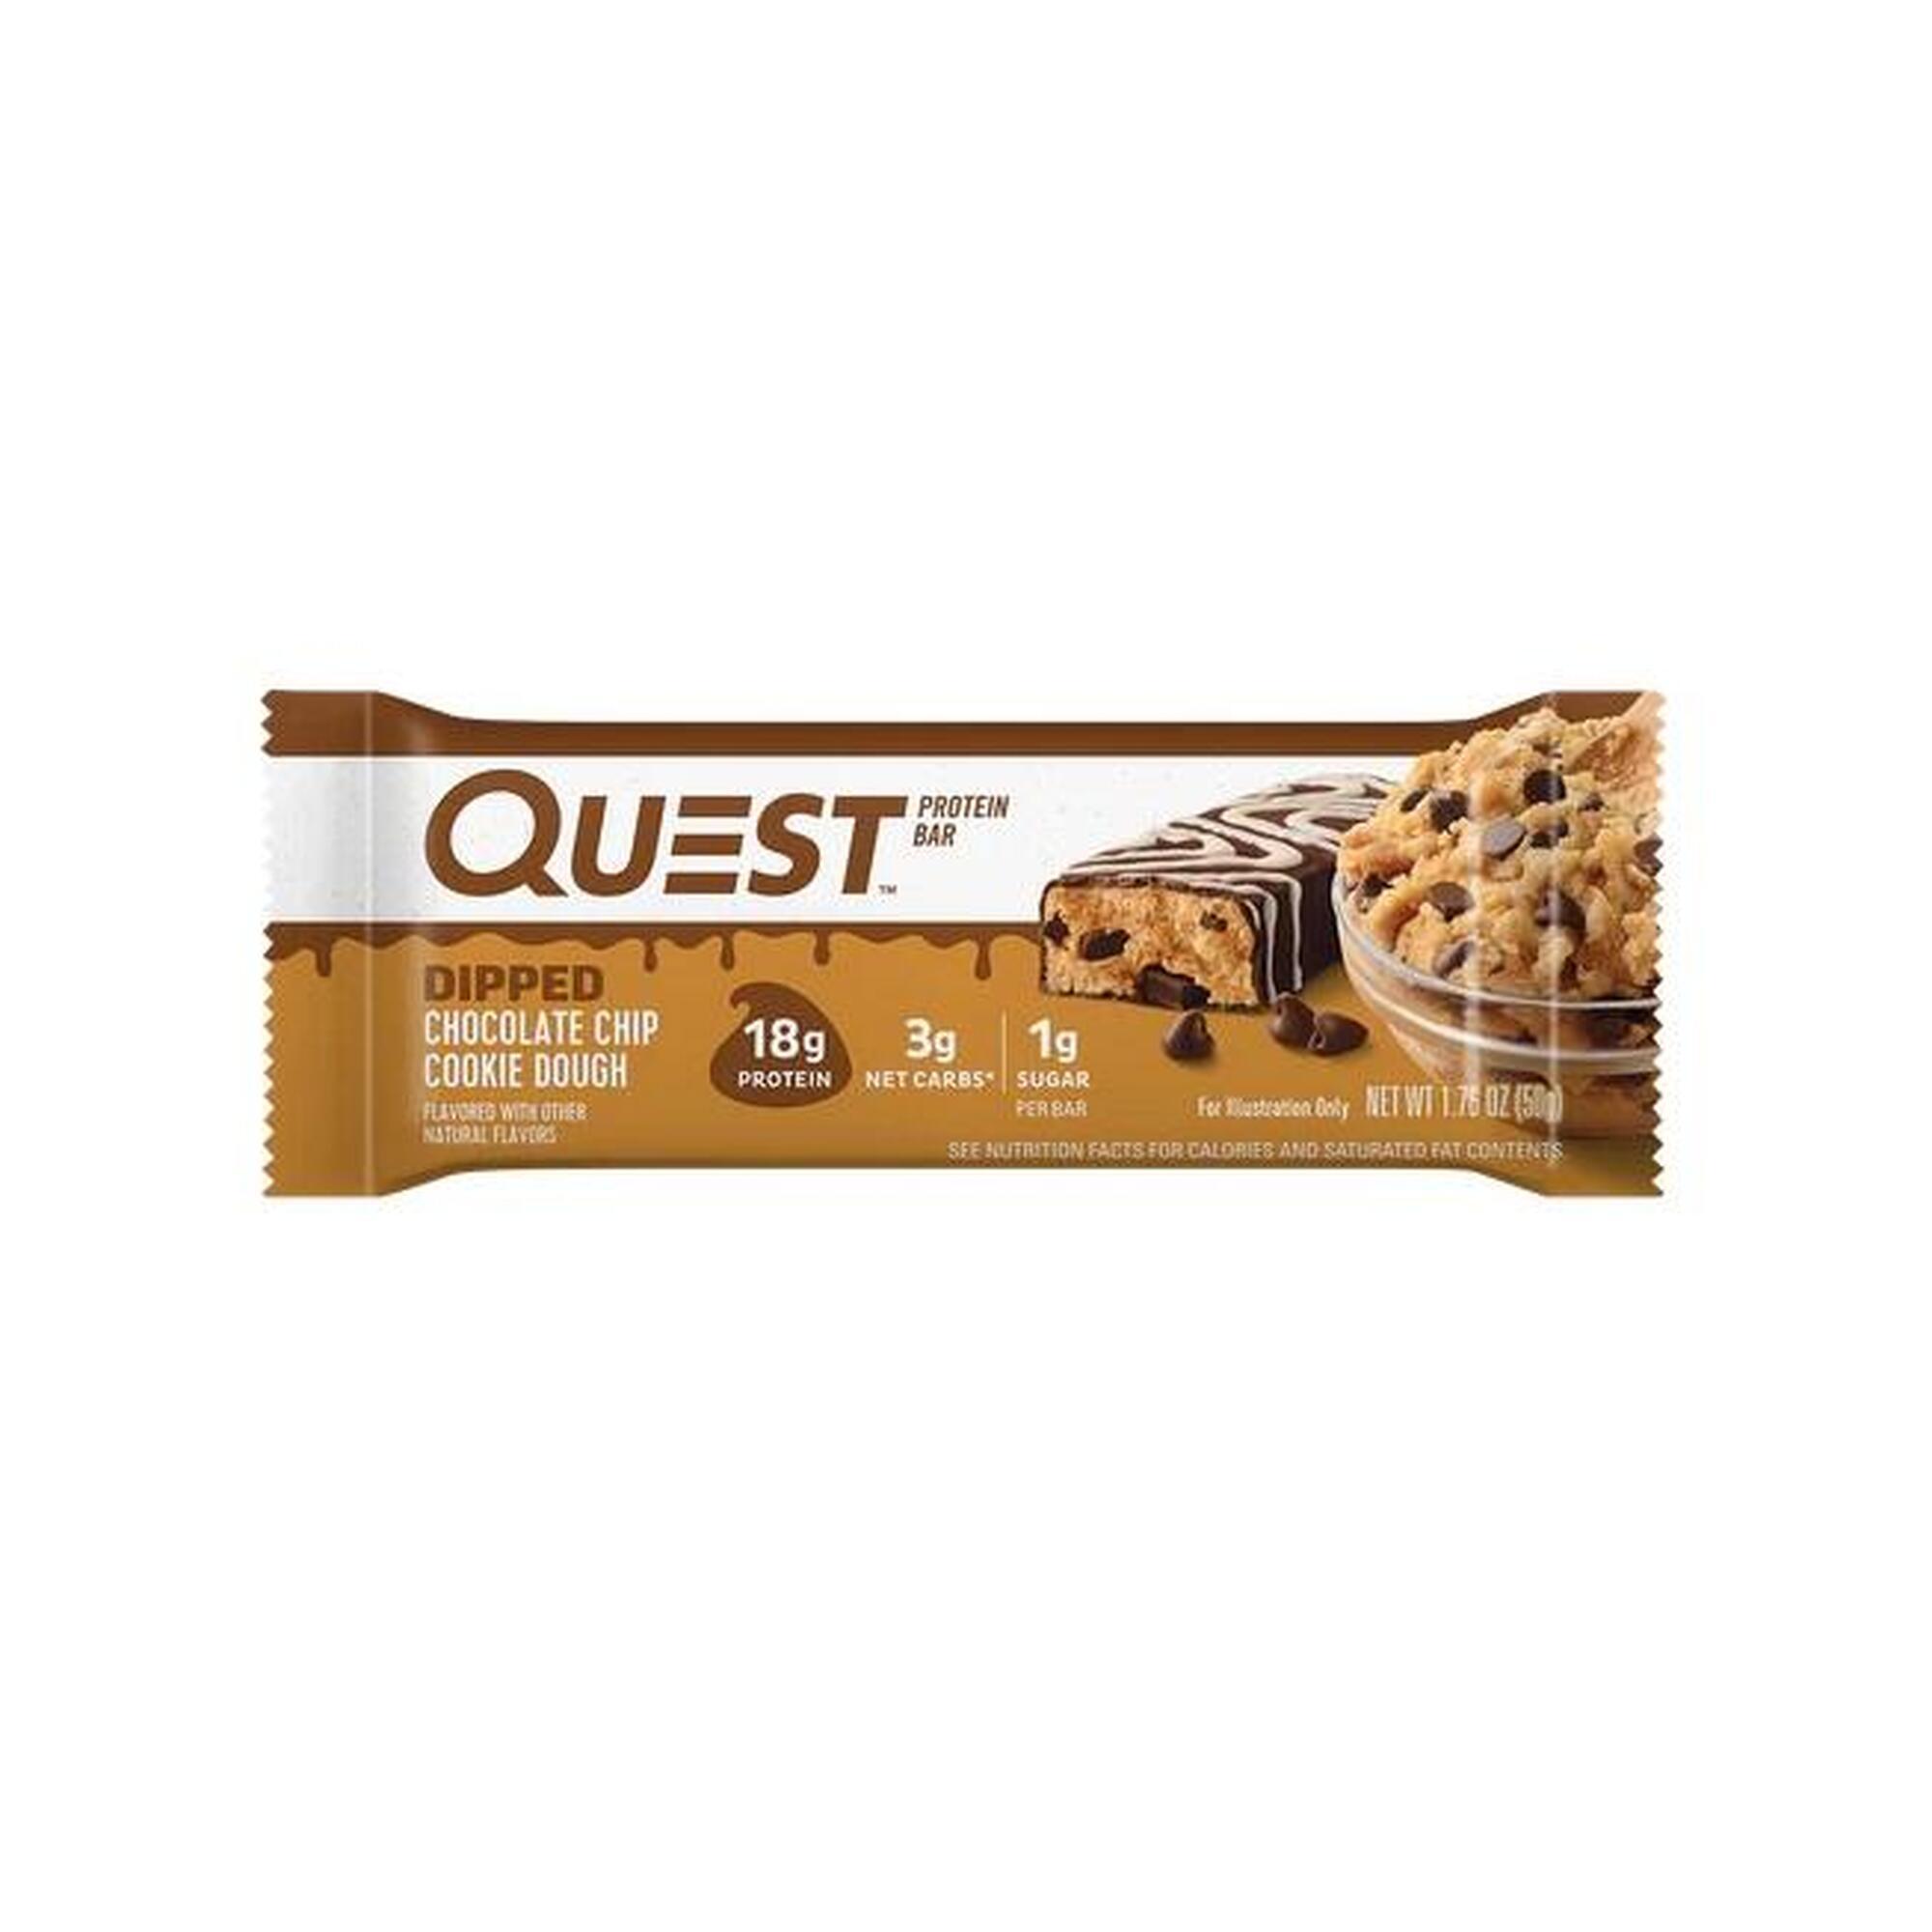 Protein Bar (4 Bars) - Dipped Chocolate Chip Cookie Dough